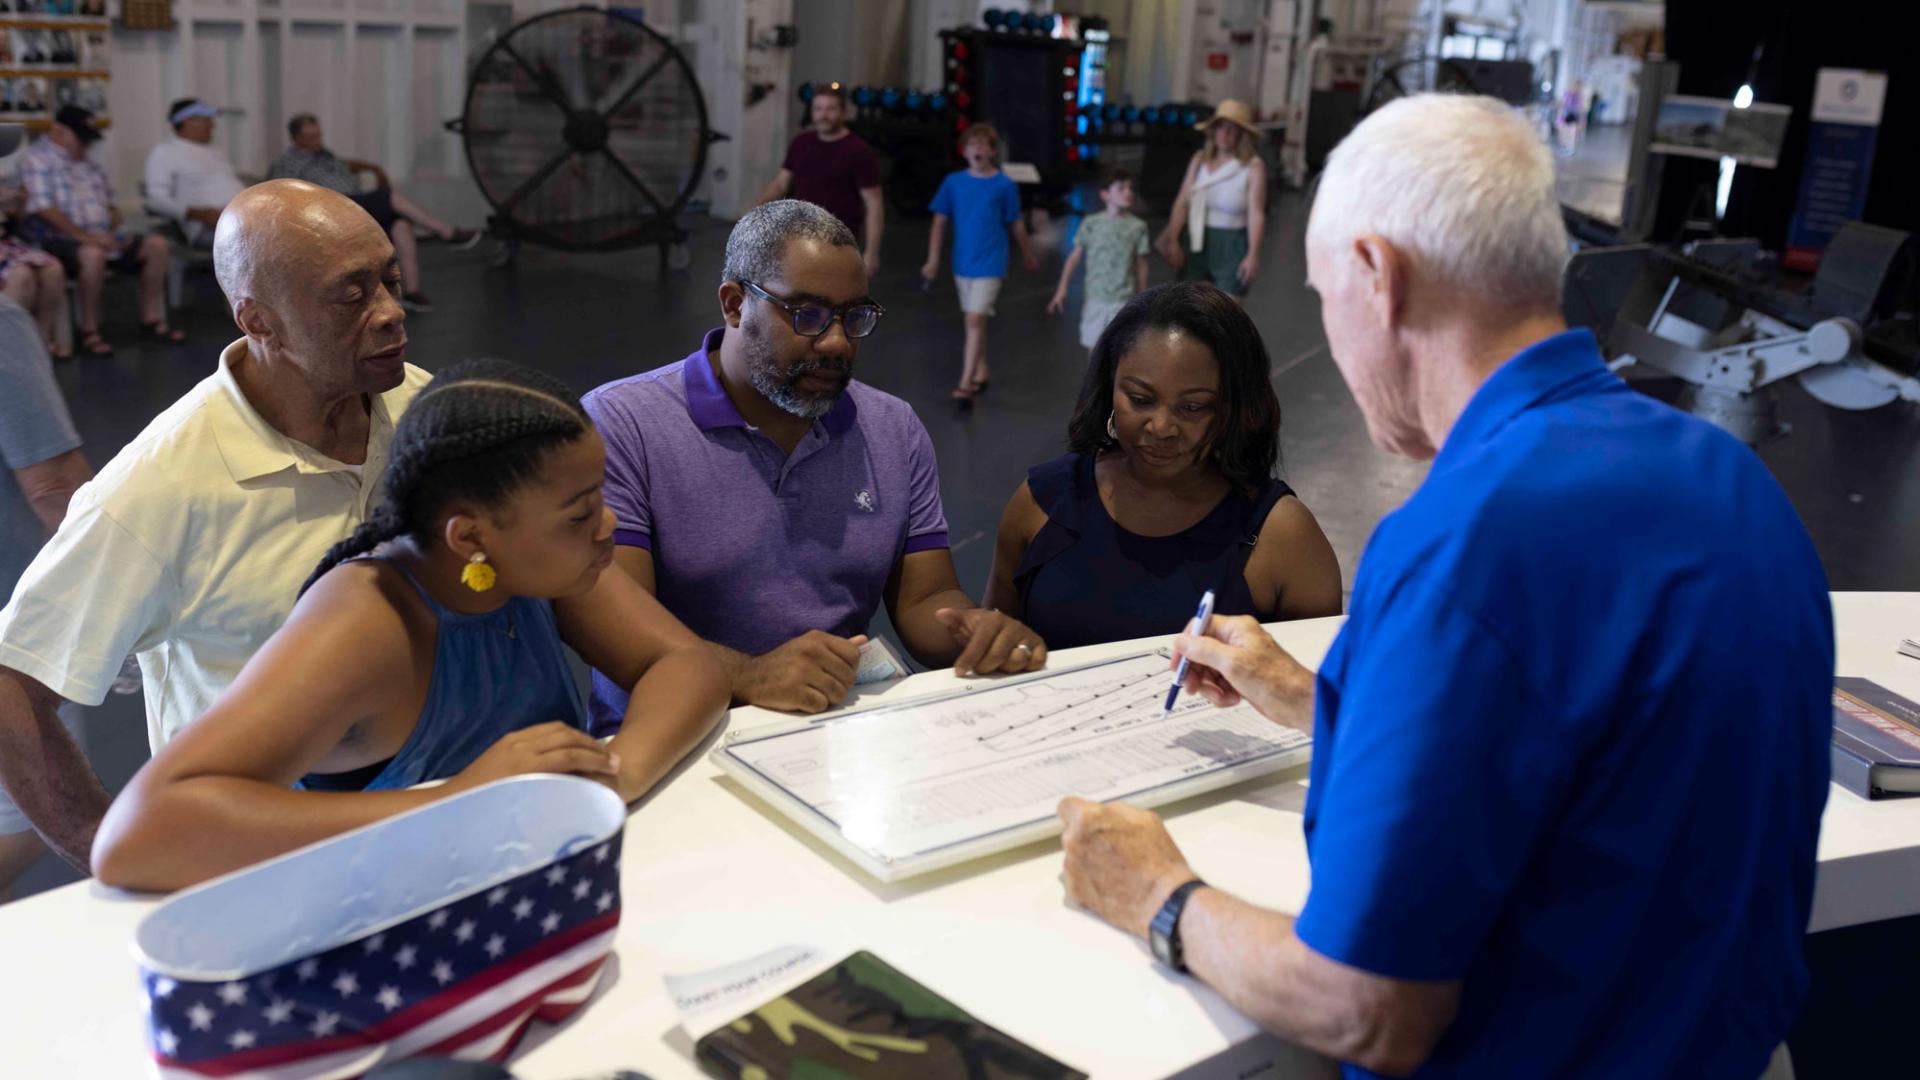 a man at an information desks shows a map of the USS Yorktown to a family